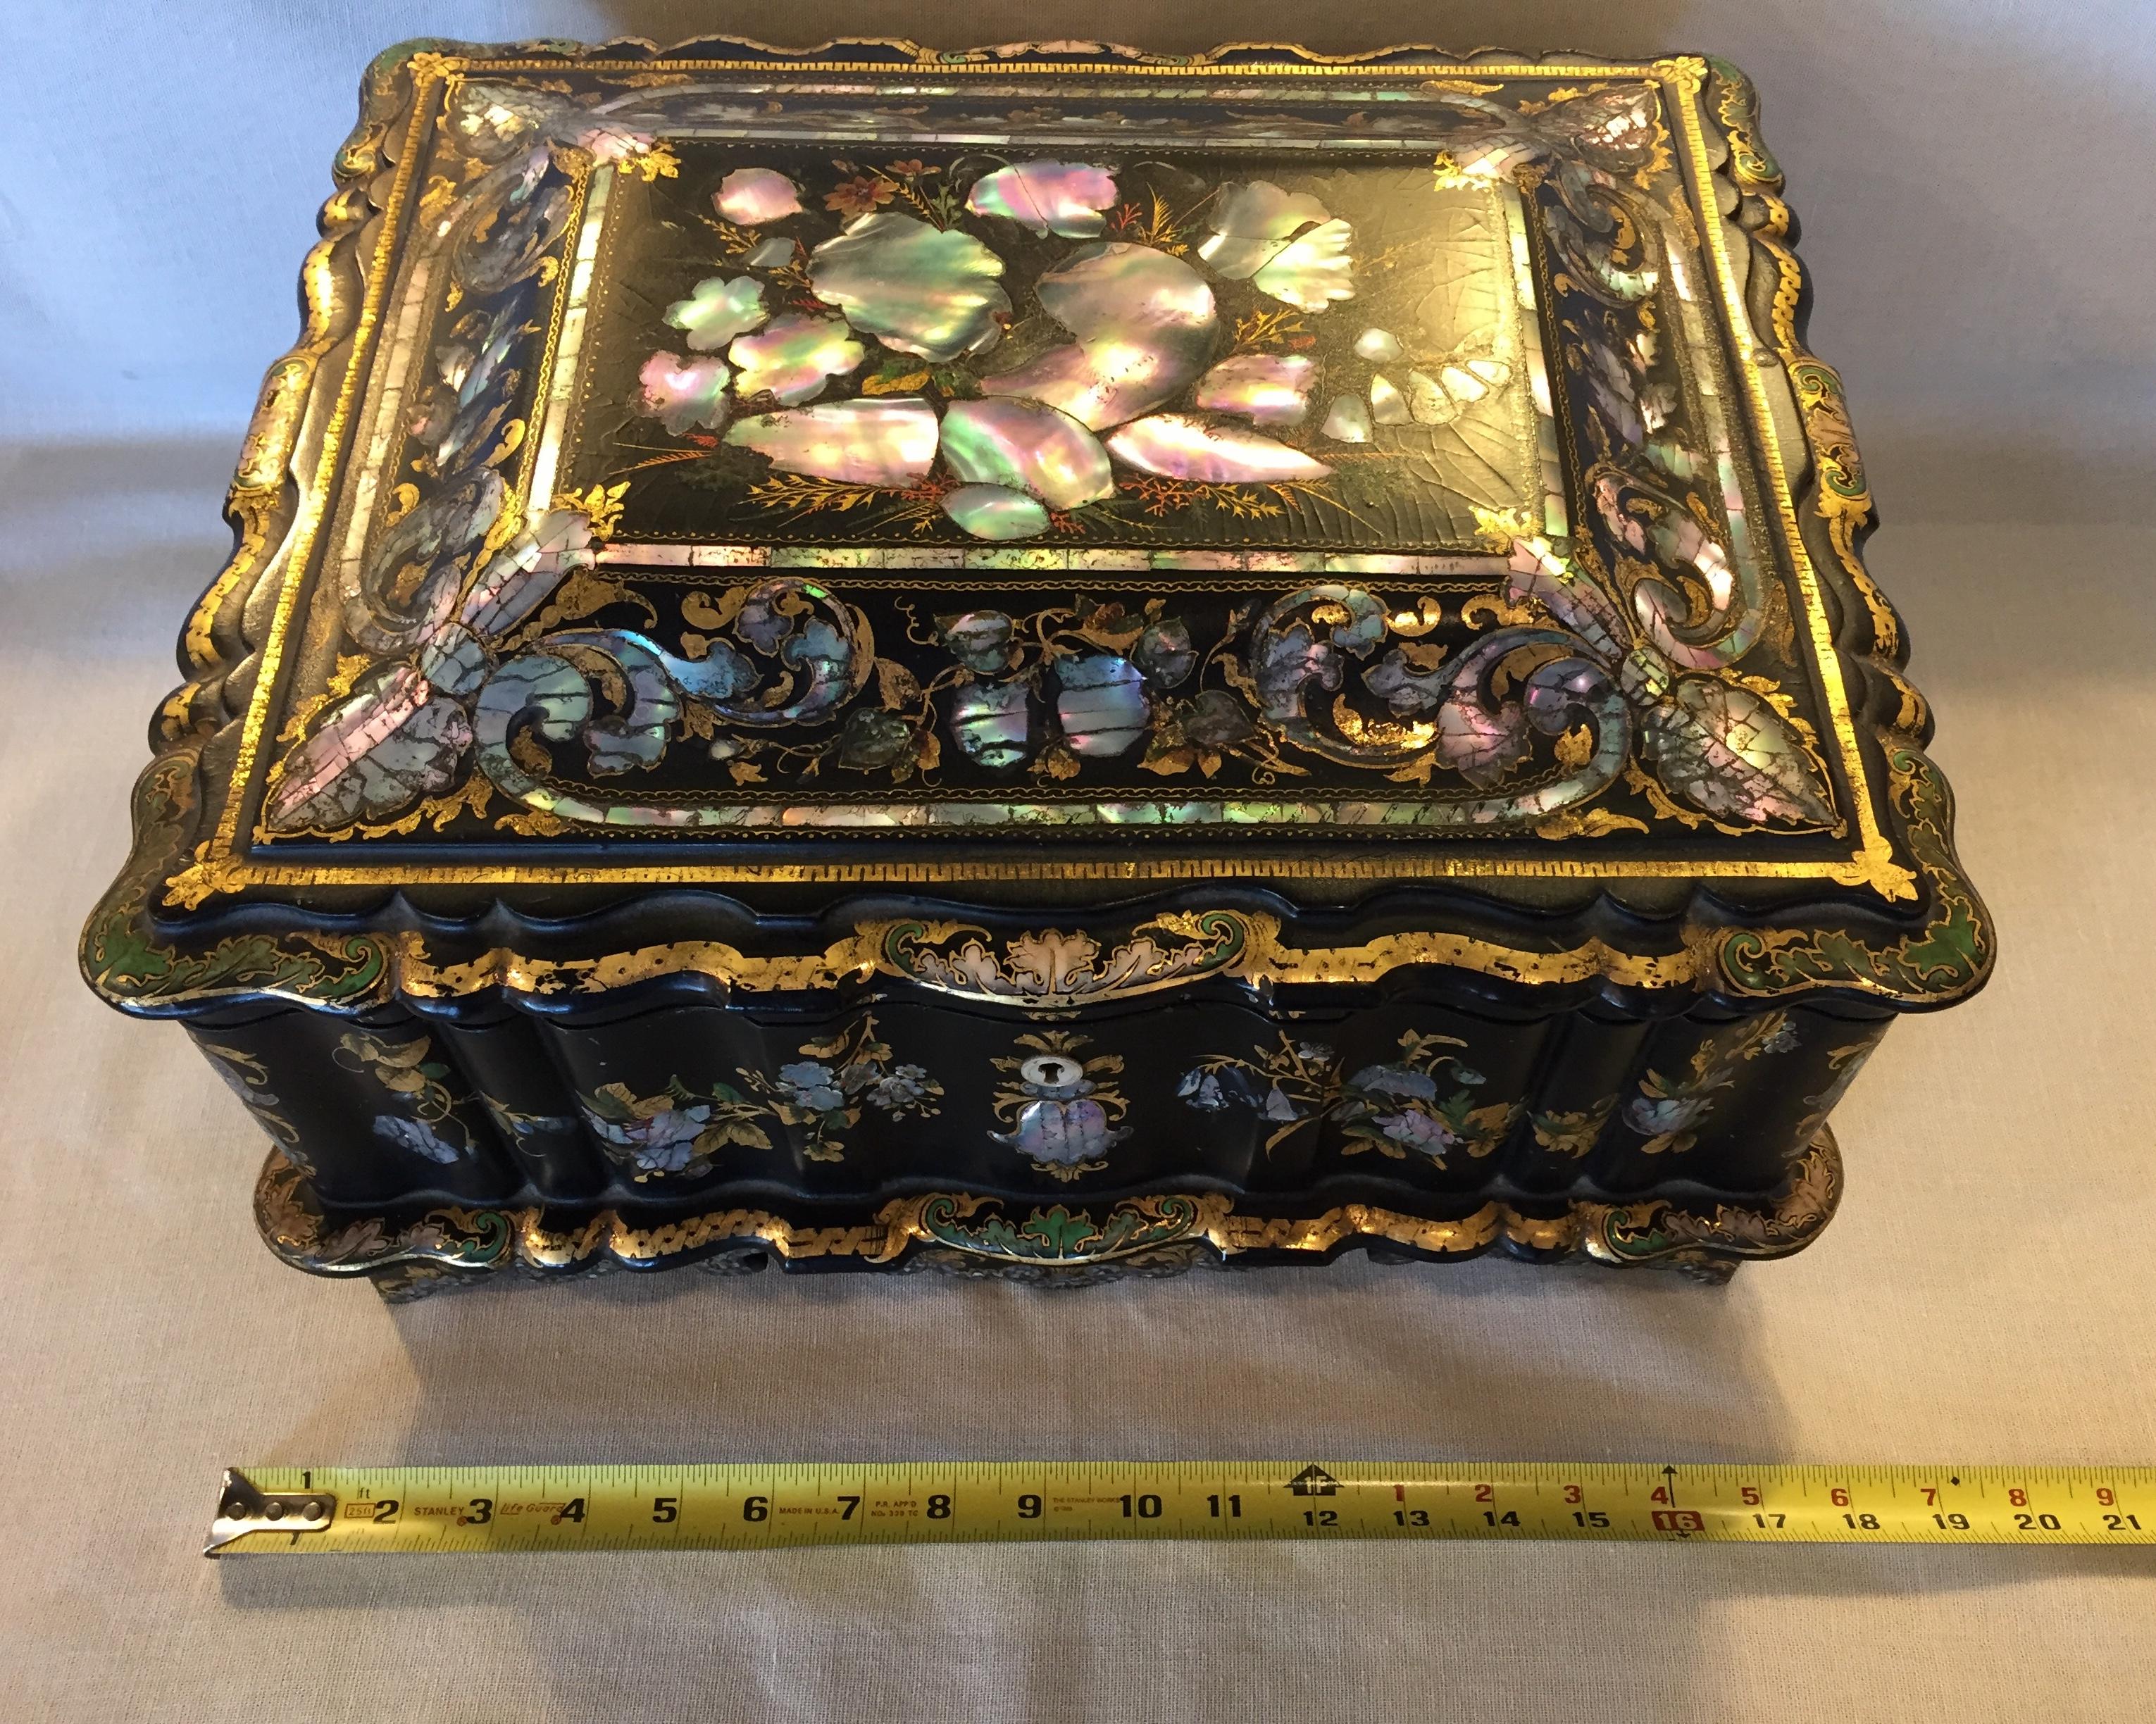 English Papier Mâché Massive Size Fine Quality 19th Century Sewing Box or Jewelry Box For Sale